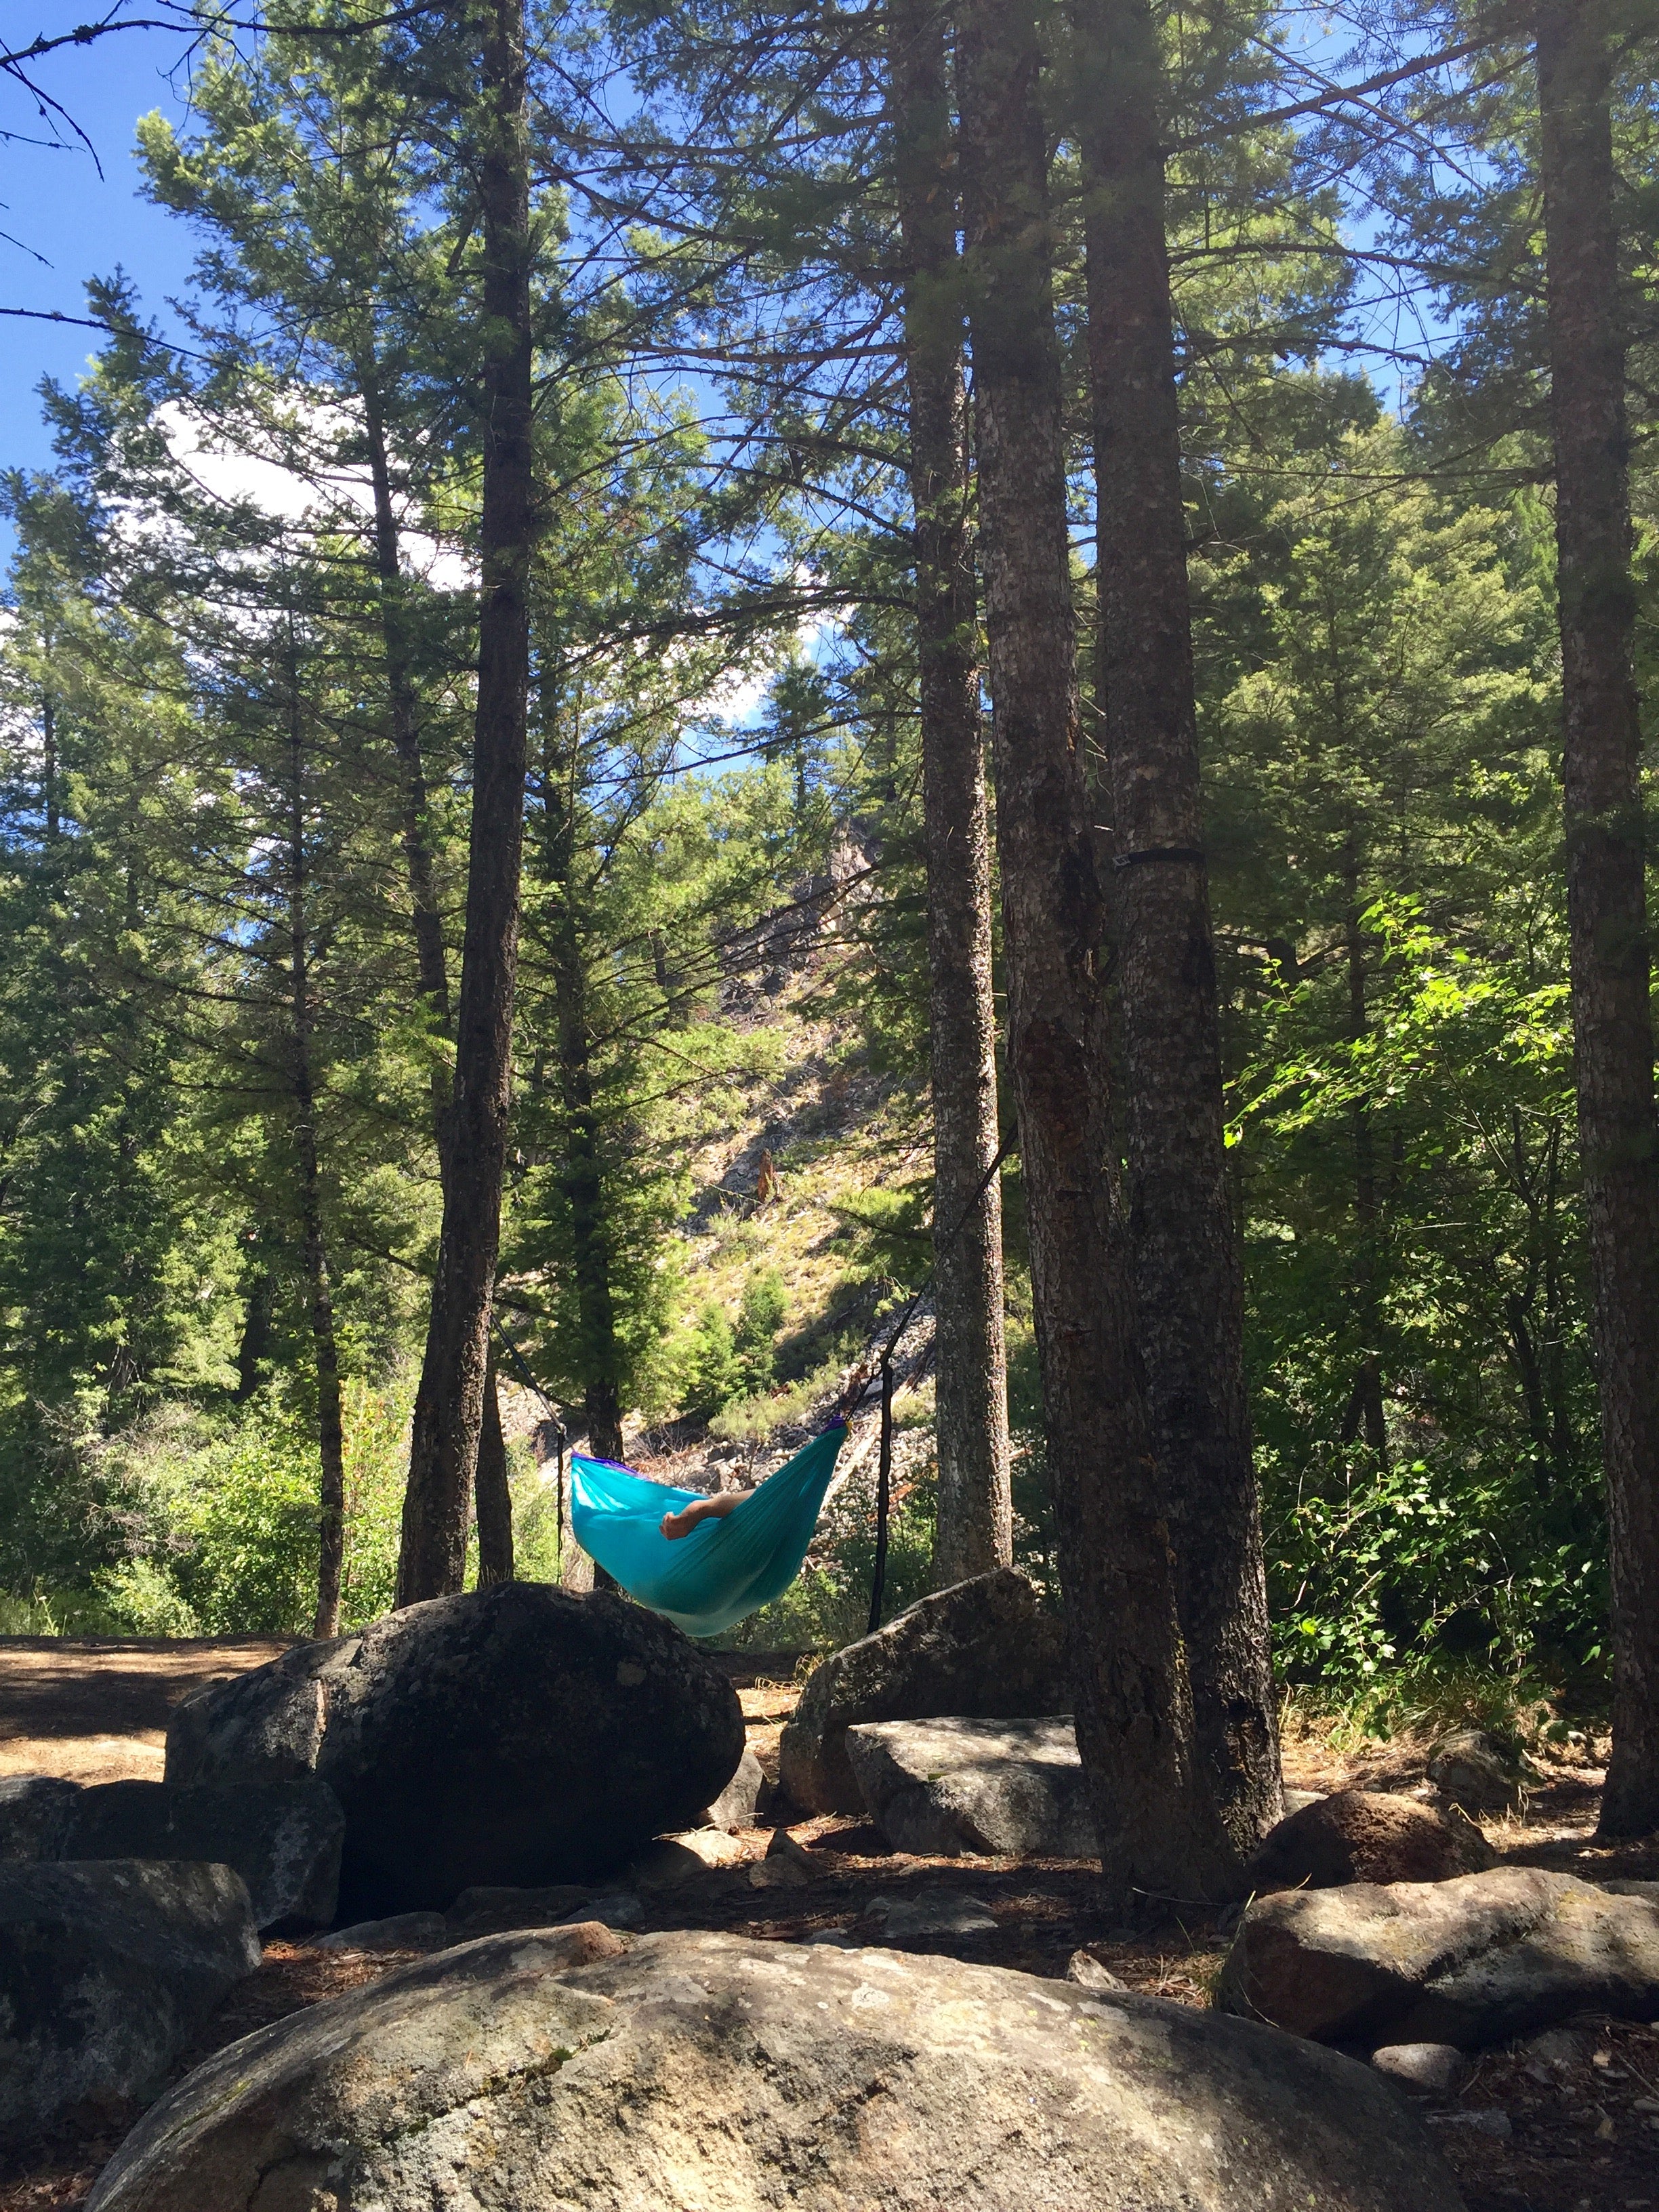 Plenty of trees for afternoon naps in the hammocks!